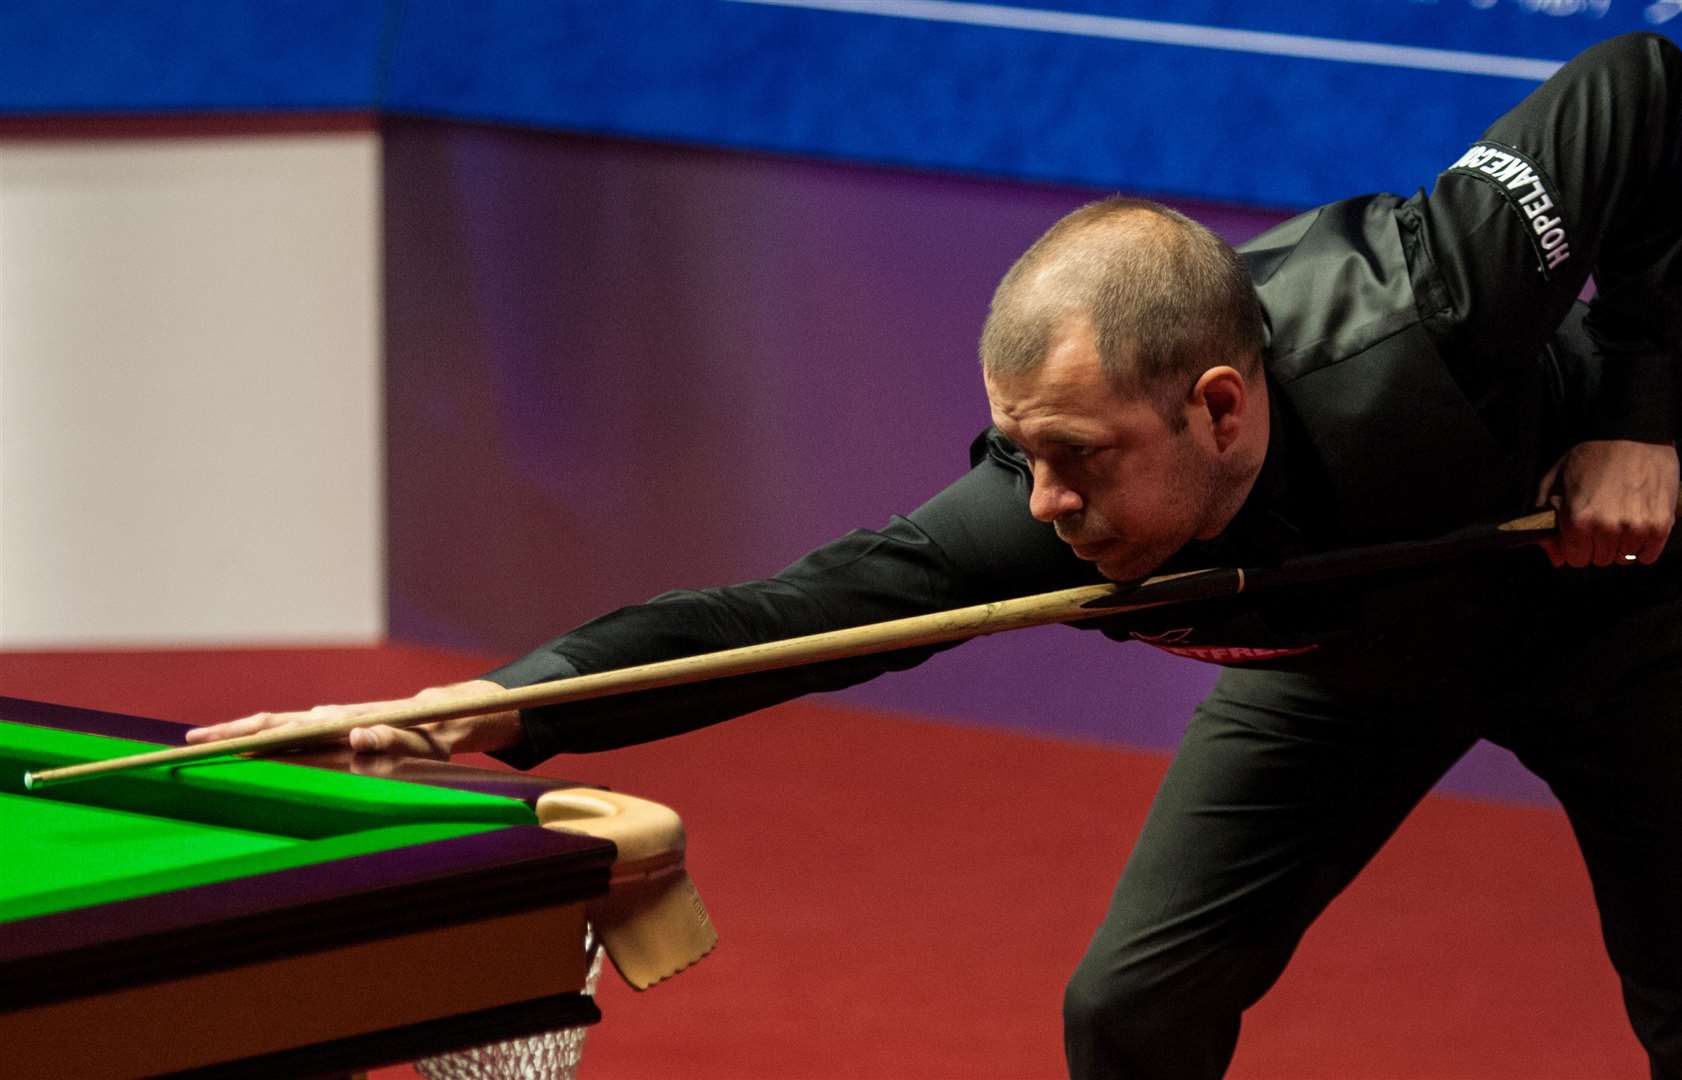 Barry Hawkins let an 8-5 lead slip in his defeat to Ryan Day. Picture: World Snooker